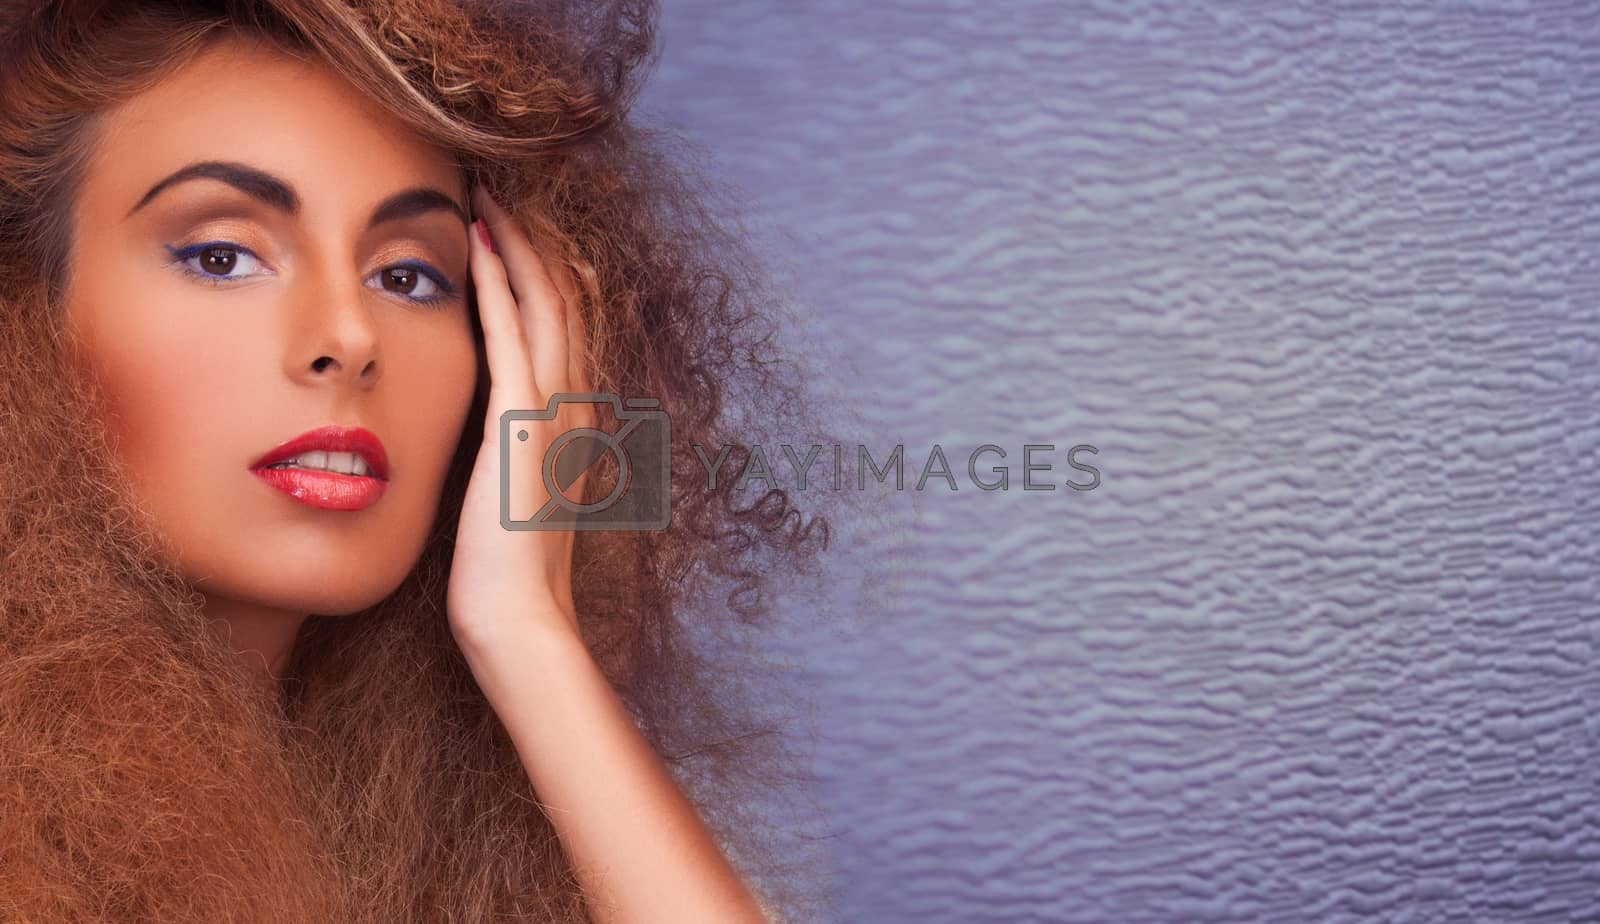 Royalty free image of woman with long curly hair by dolgachov